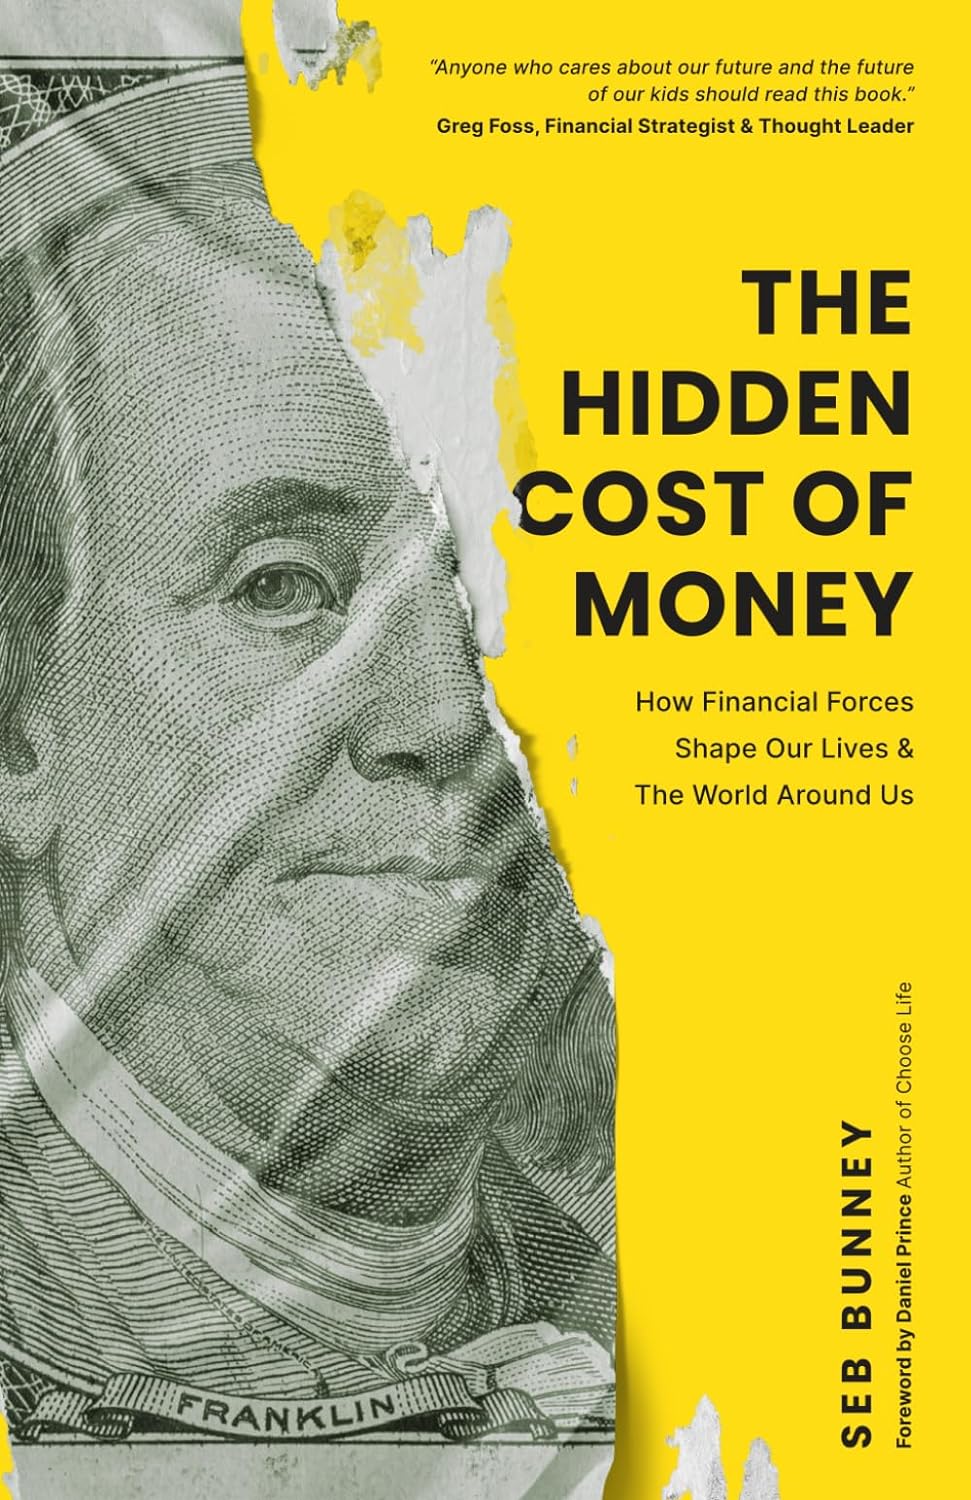 The Hidden Cost of Money: How Financial Forces Shape Our Lives & the World Around Us